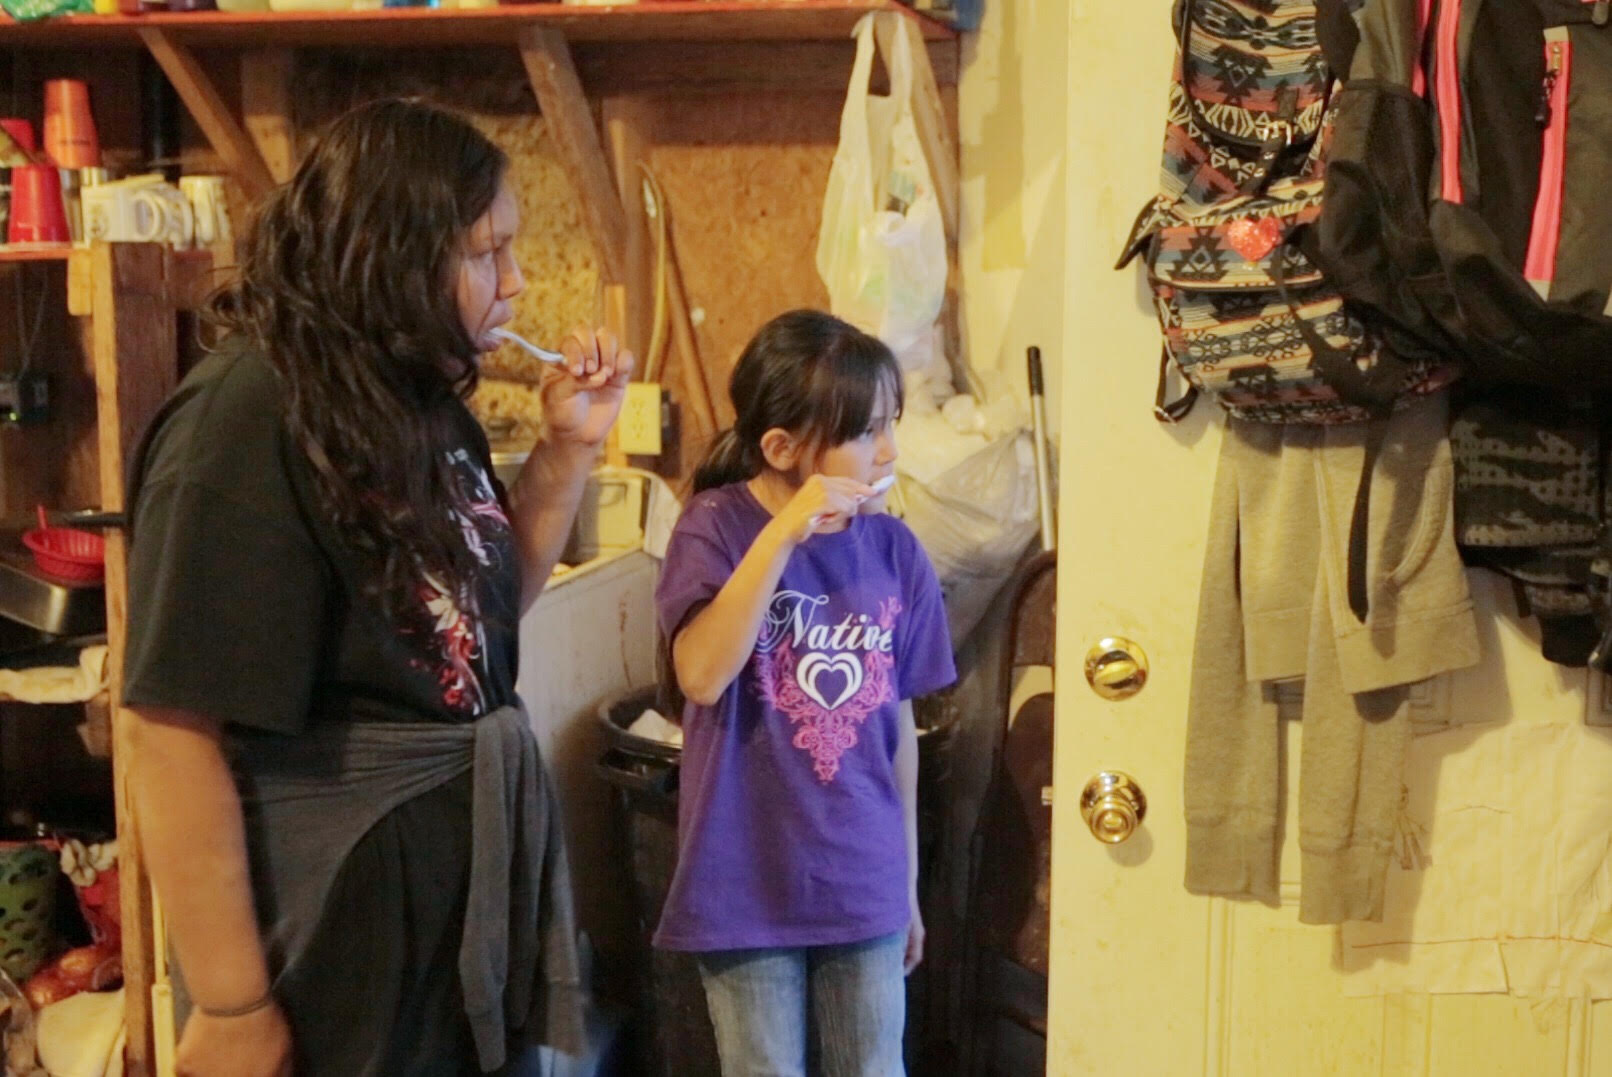   Baby Lisa’s brothers and sisters don’t have a sink, a shower or a toilet... so they use a bucket and a shelf as a ‘bathroom.’ Because of Baby Lisa’s special medical needs, this isn’t an option for her. About 40% of Navajo-American kids living on th